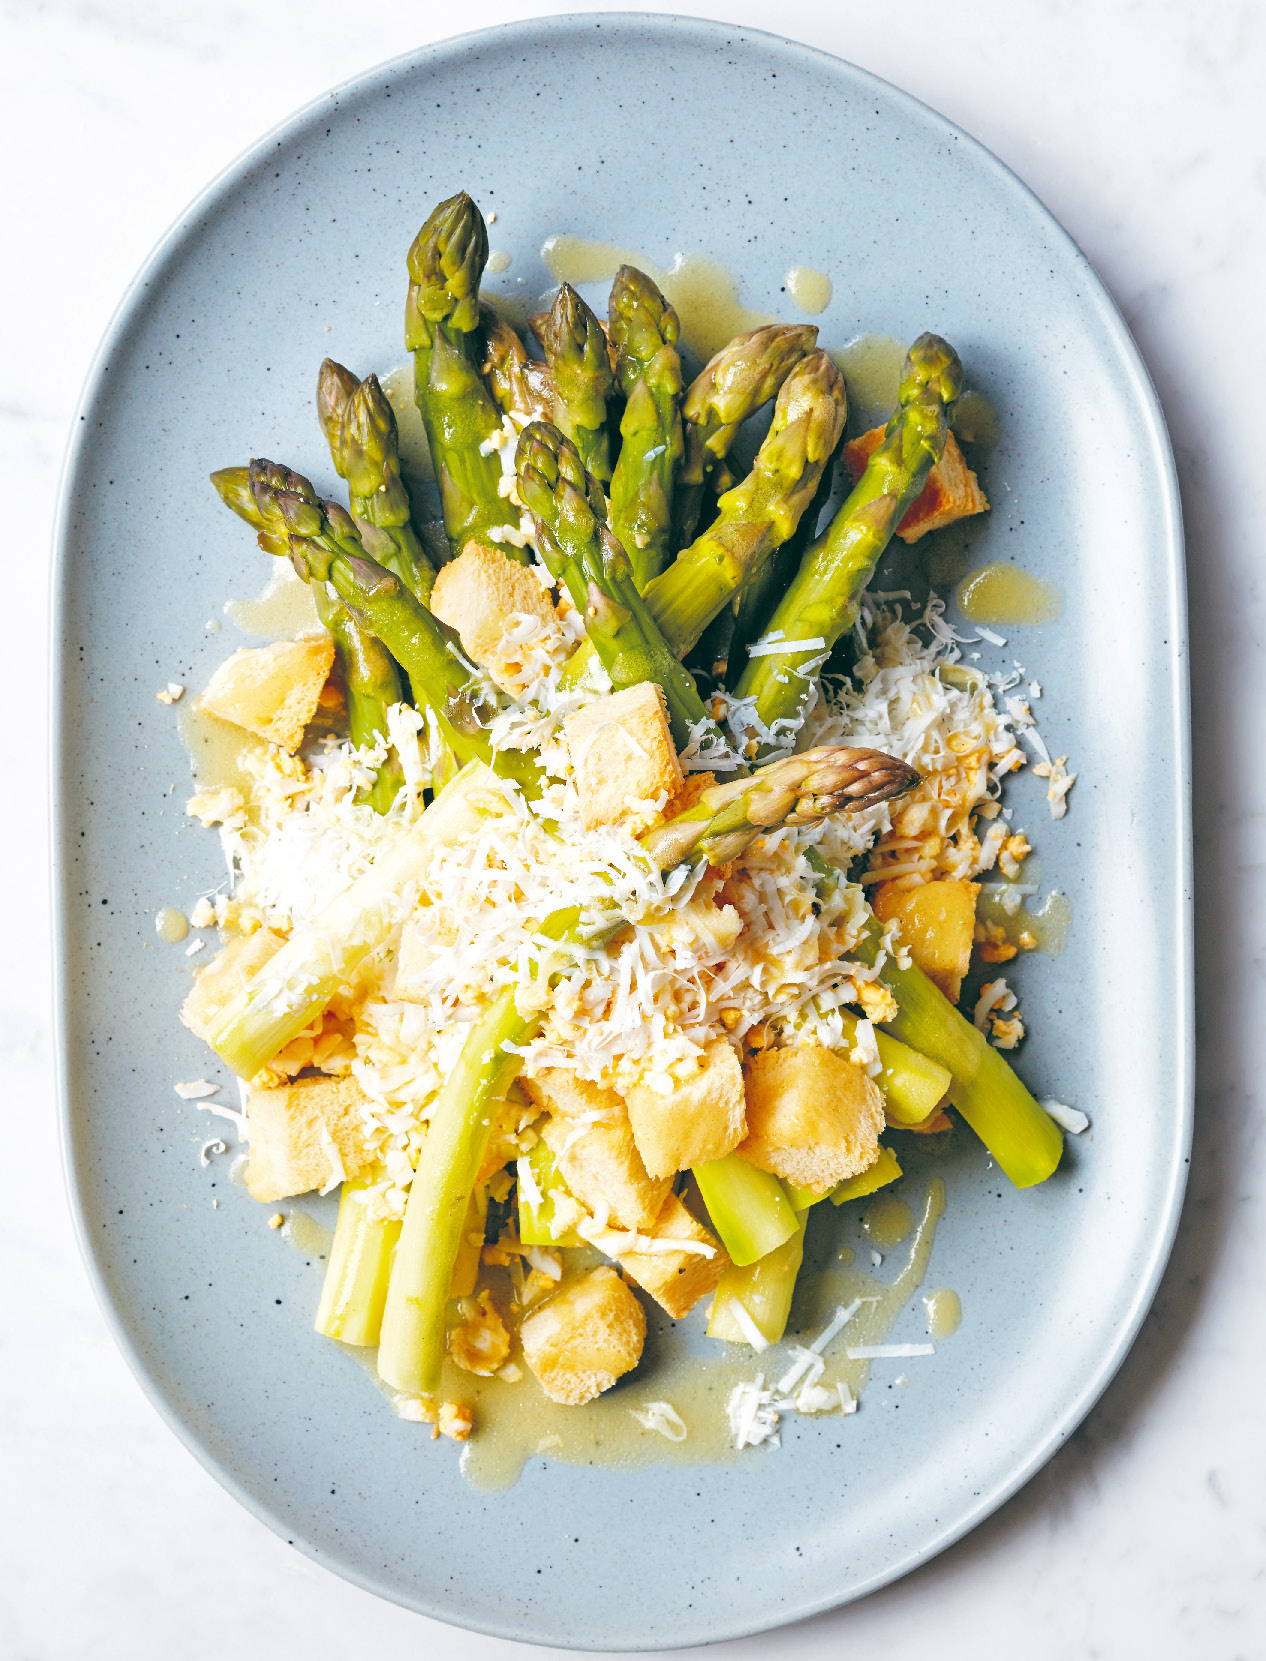 Asparagus with challah croutons and duck egg